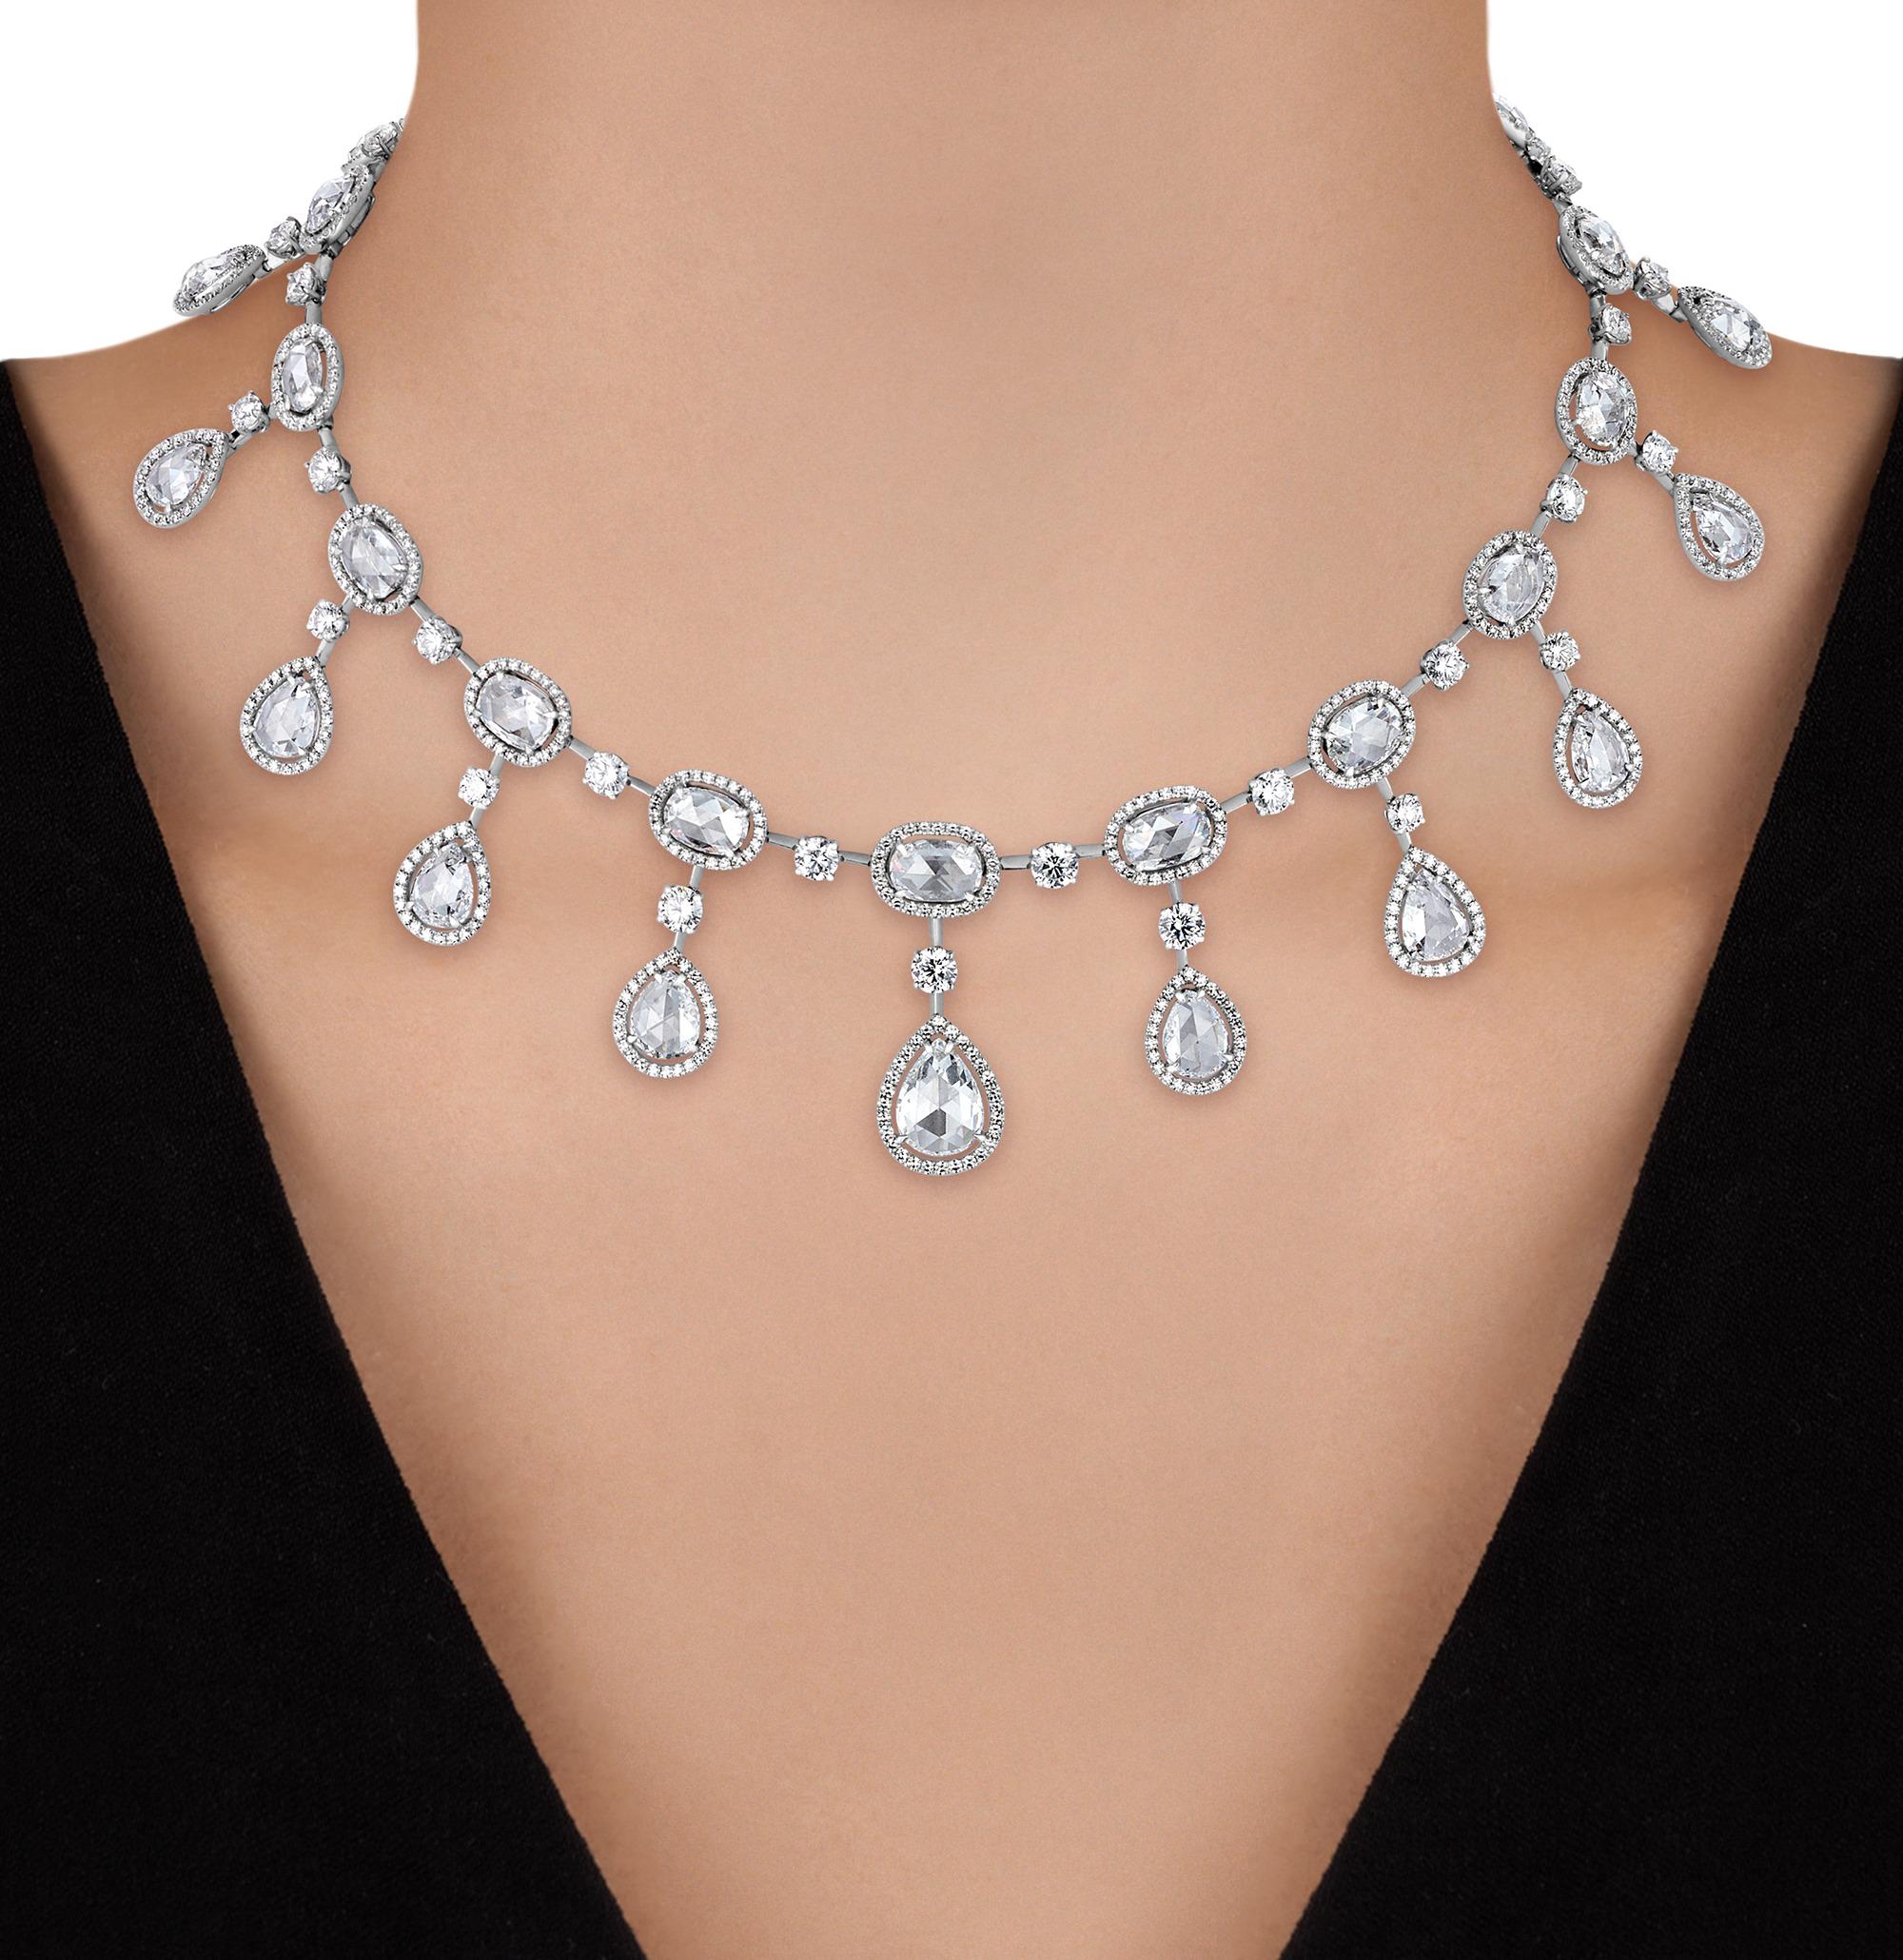 Women's Rose Cut Diamond Necklace And Earrings, 61.28 Carats For Sale